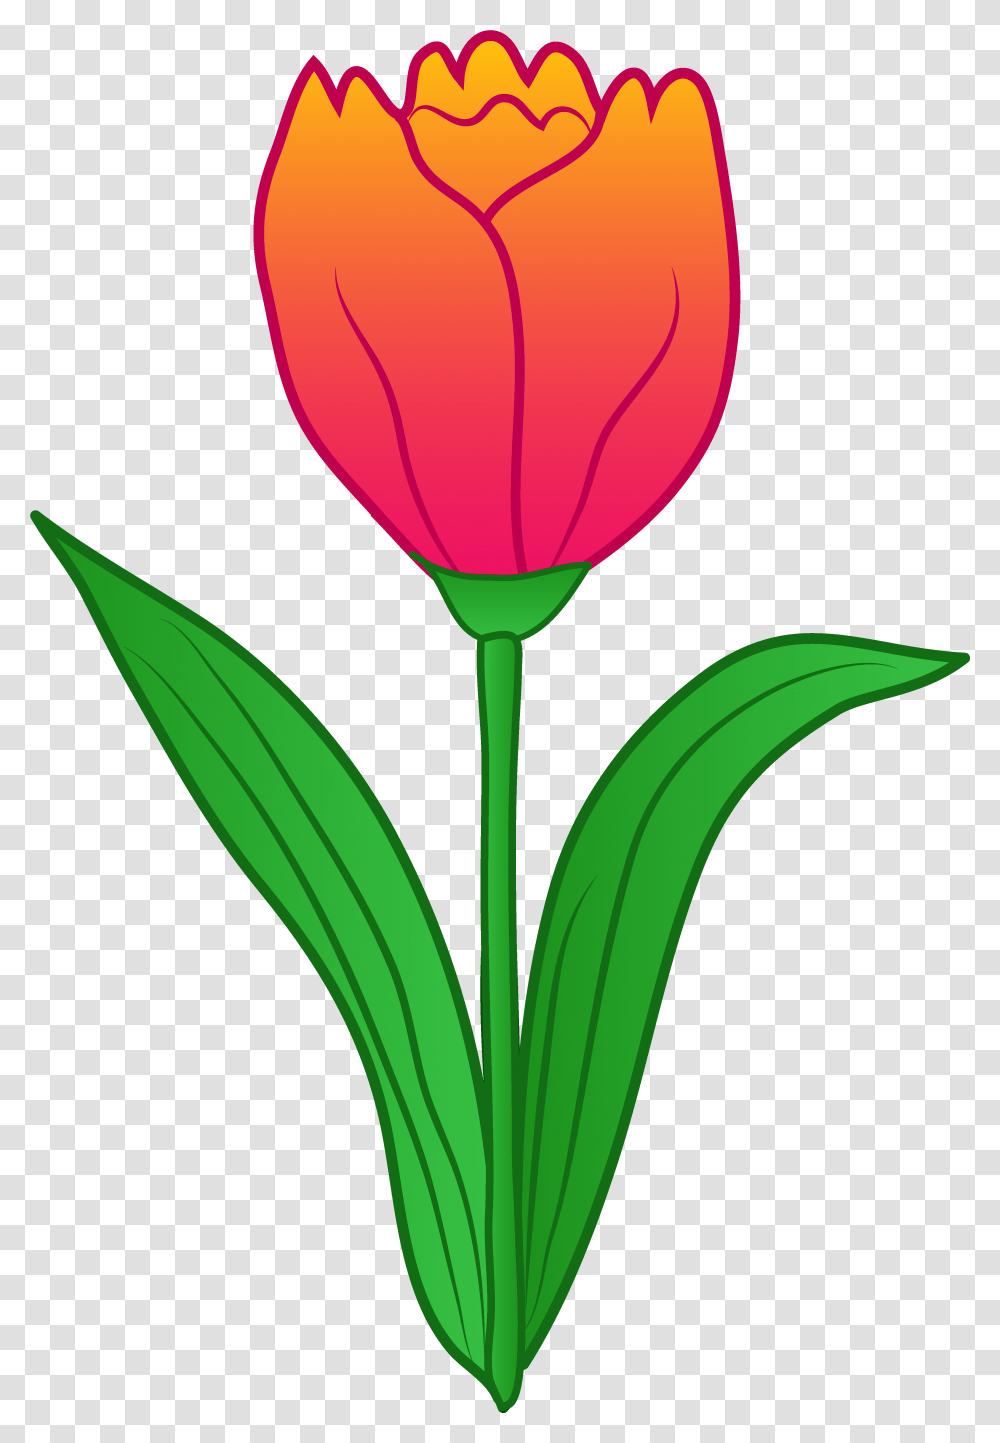 Library Of Flower Image Free Tulip Files Clipart Clip Art Of Tulip Flower, Plant, Blossom, Petal Transparent Png